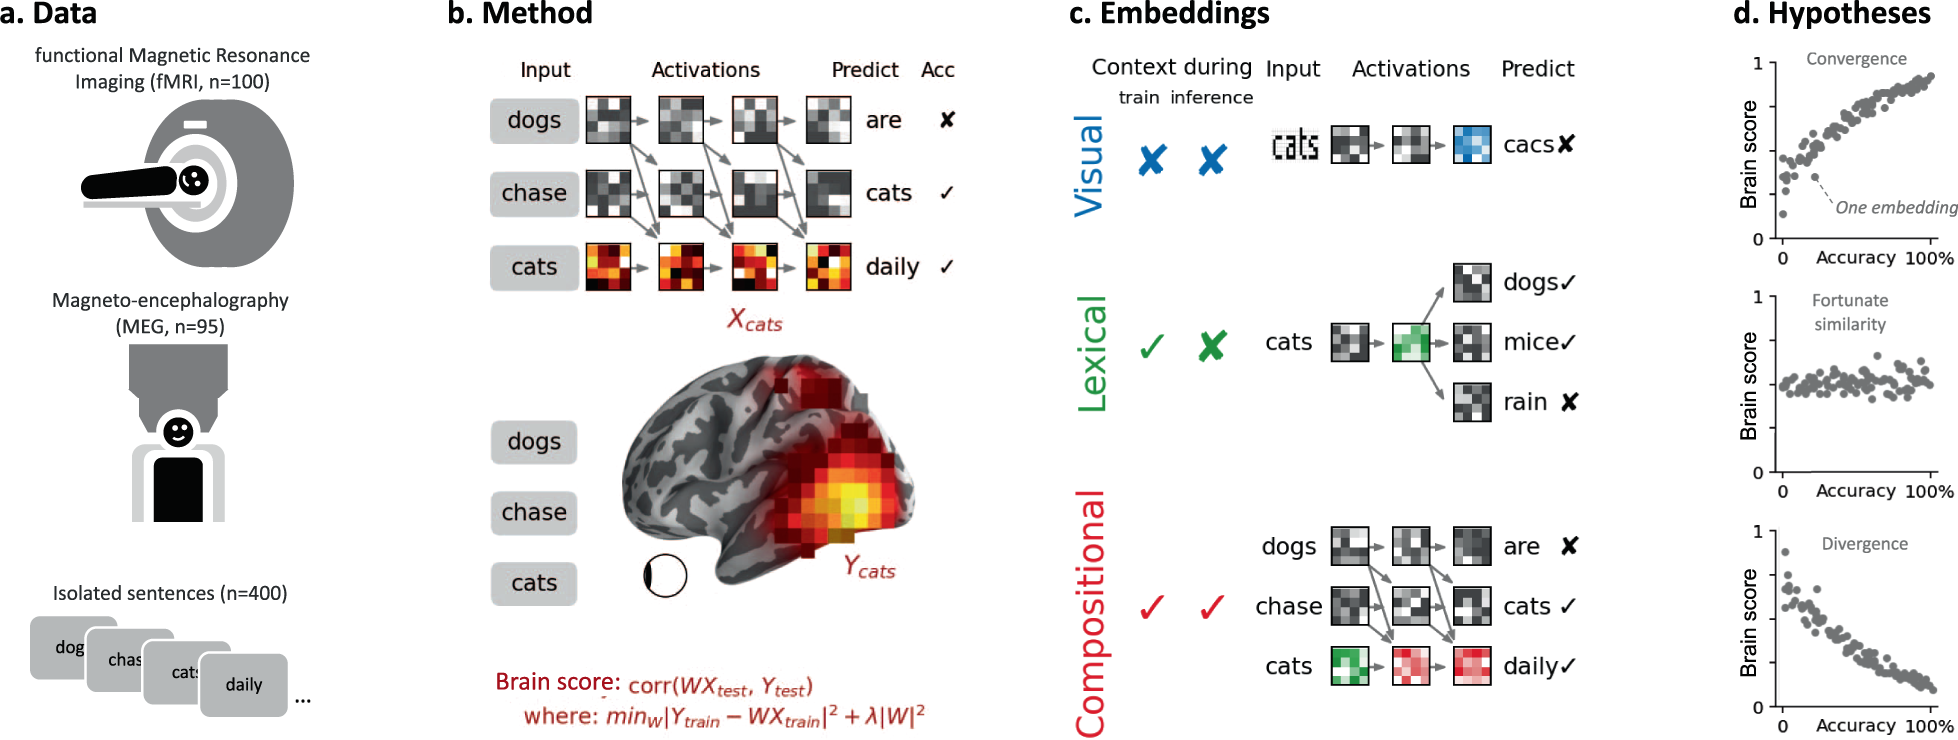 Brains and algorithms partially converge in natural language processing |  Communications Biology